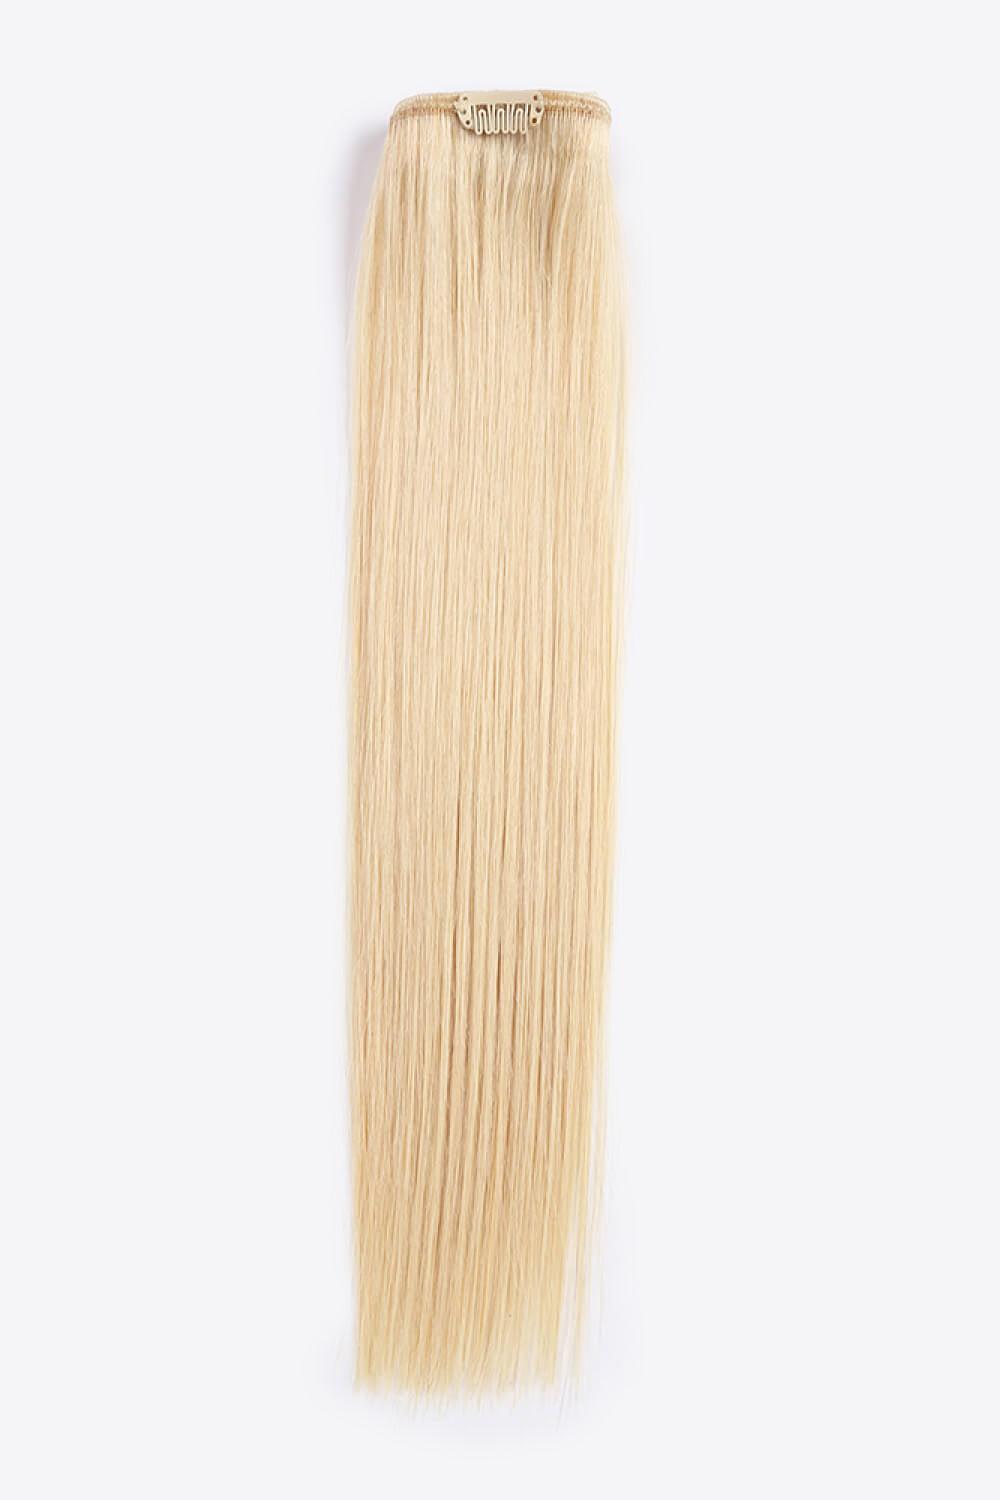 20" 120g Clip-in Hair Extensions Indian Human Hair in Blonde BLUE ZONE PLANET